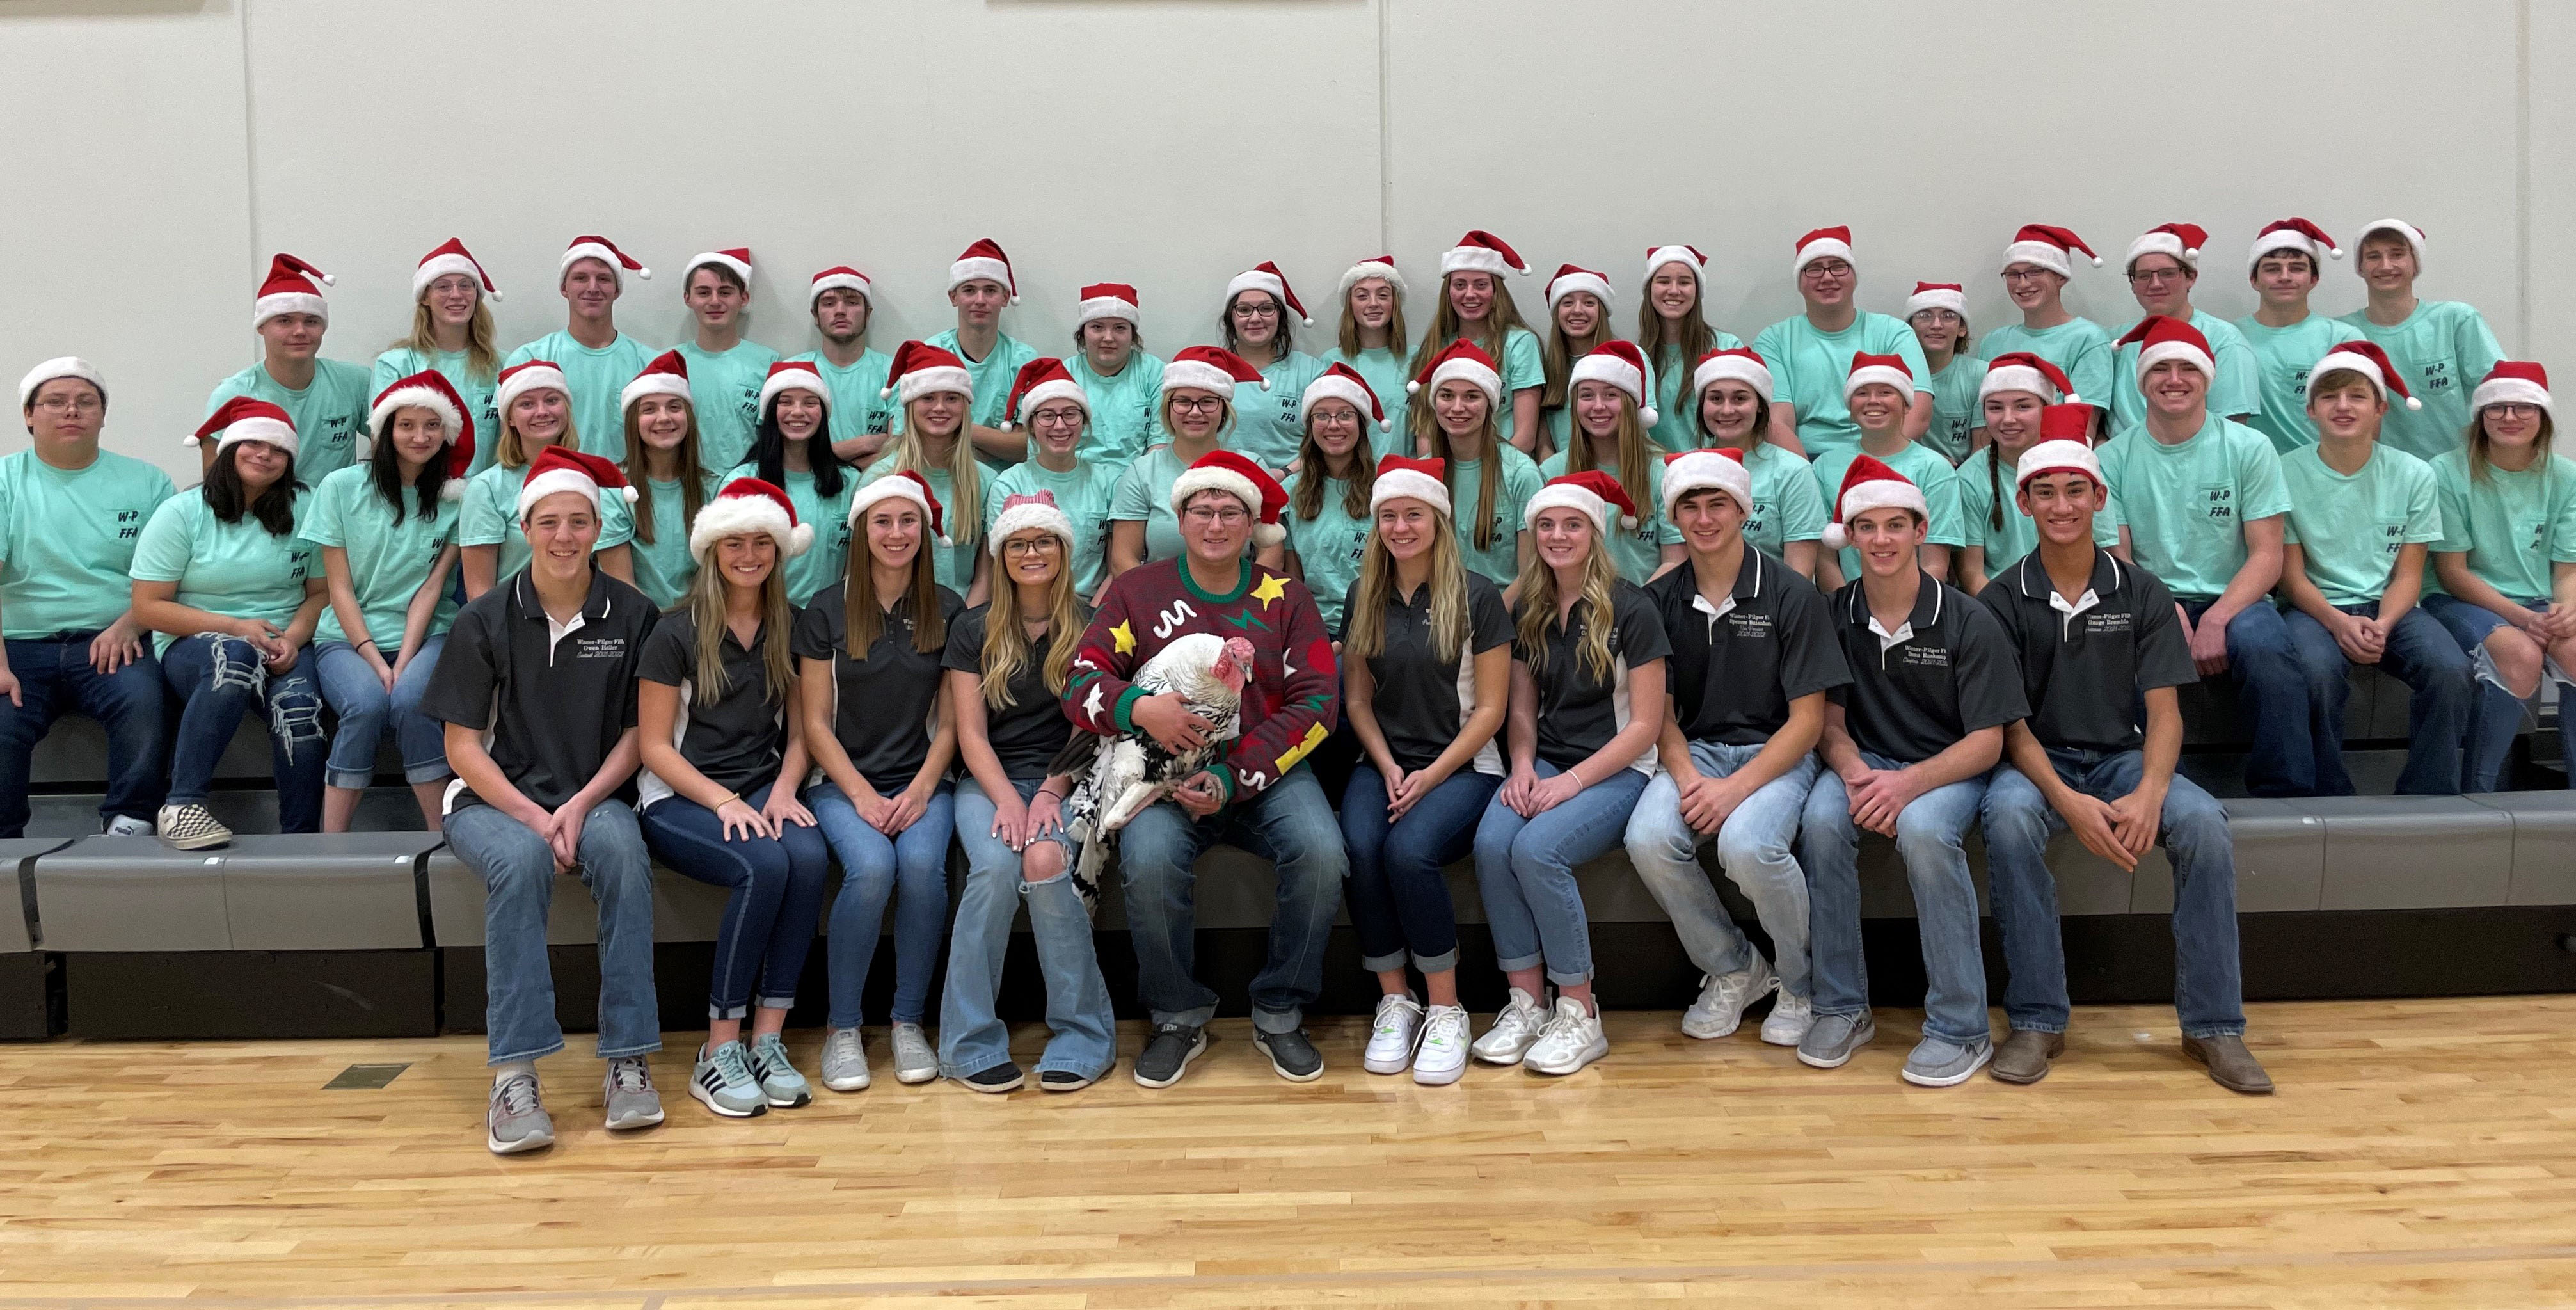 FFA Advisor Wade Overturf, center front, gathered members of the Wisner-Pilger FFA Chapter for a festive holiday scene. (Courtesy photo)